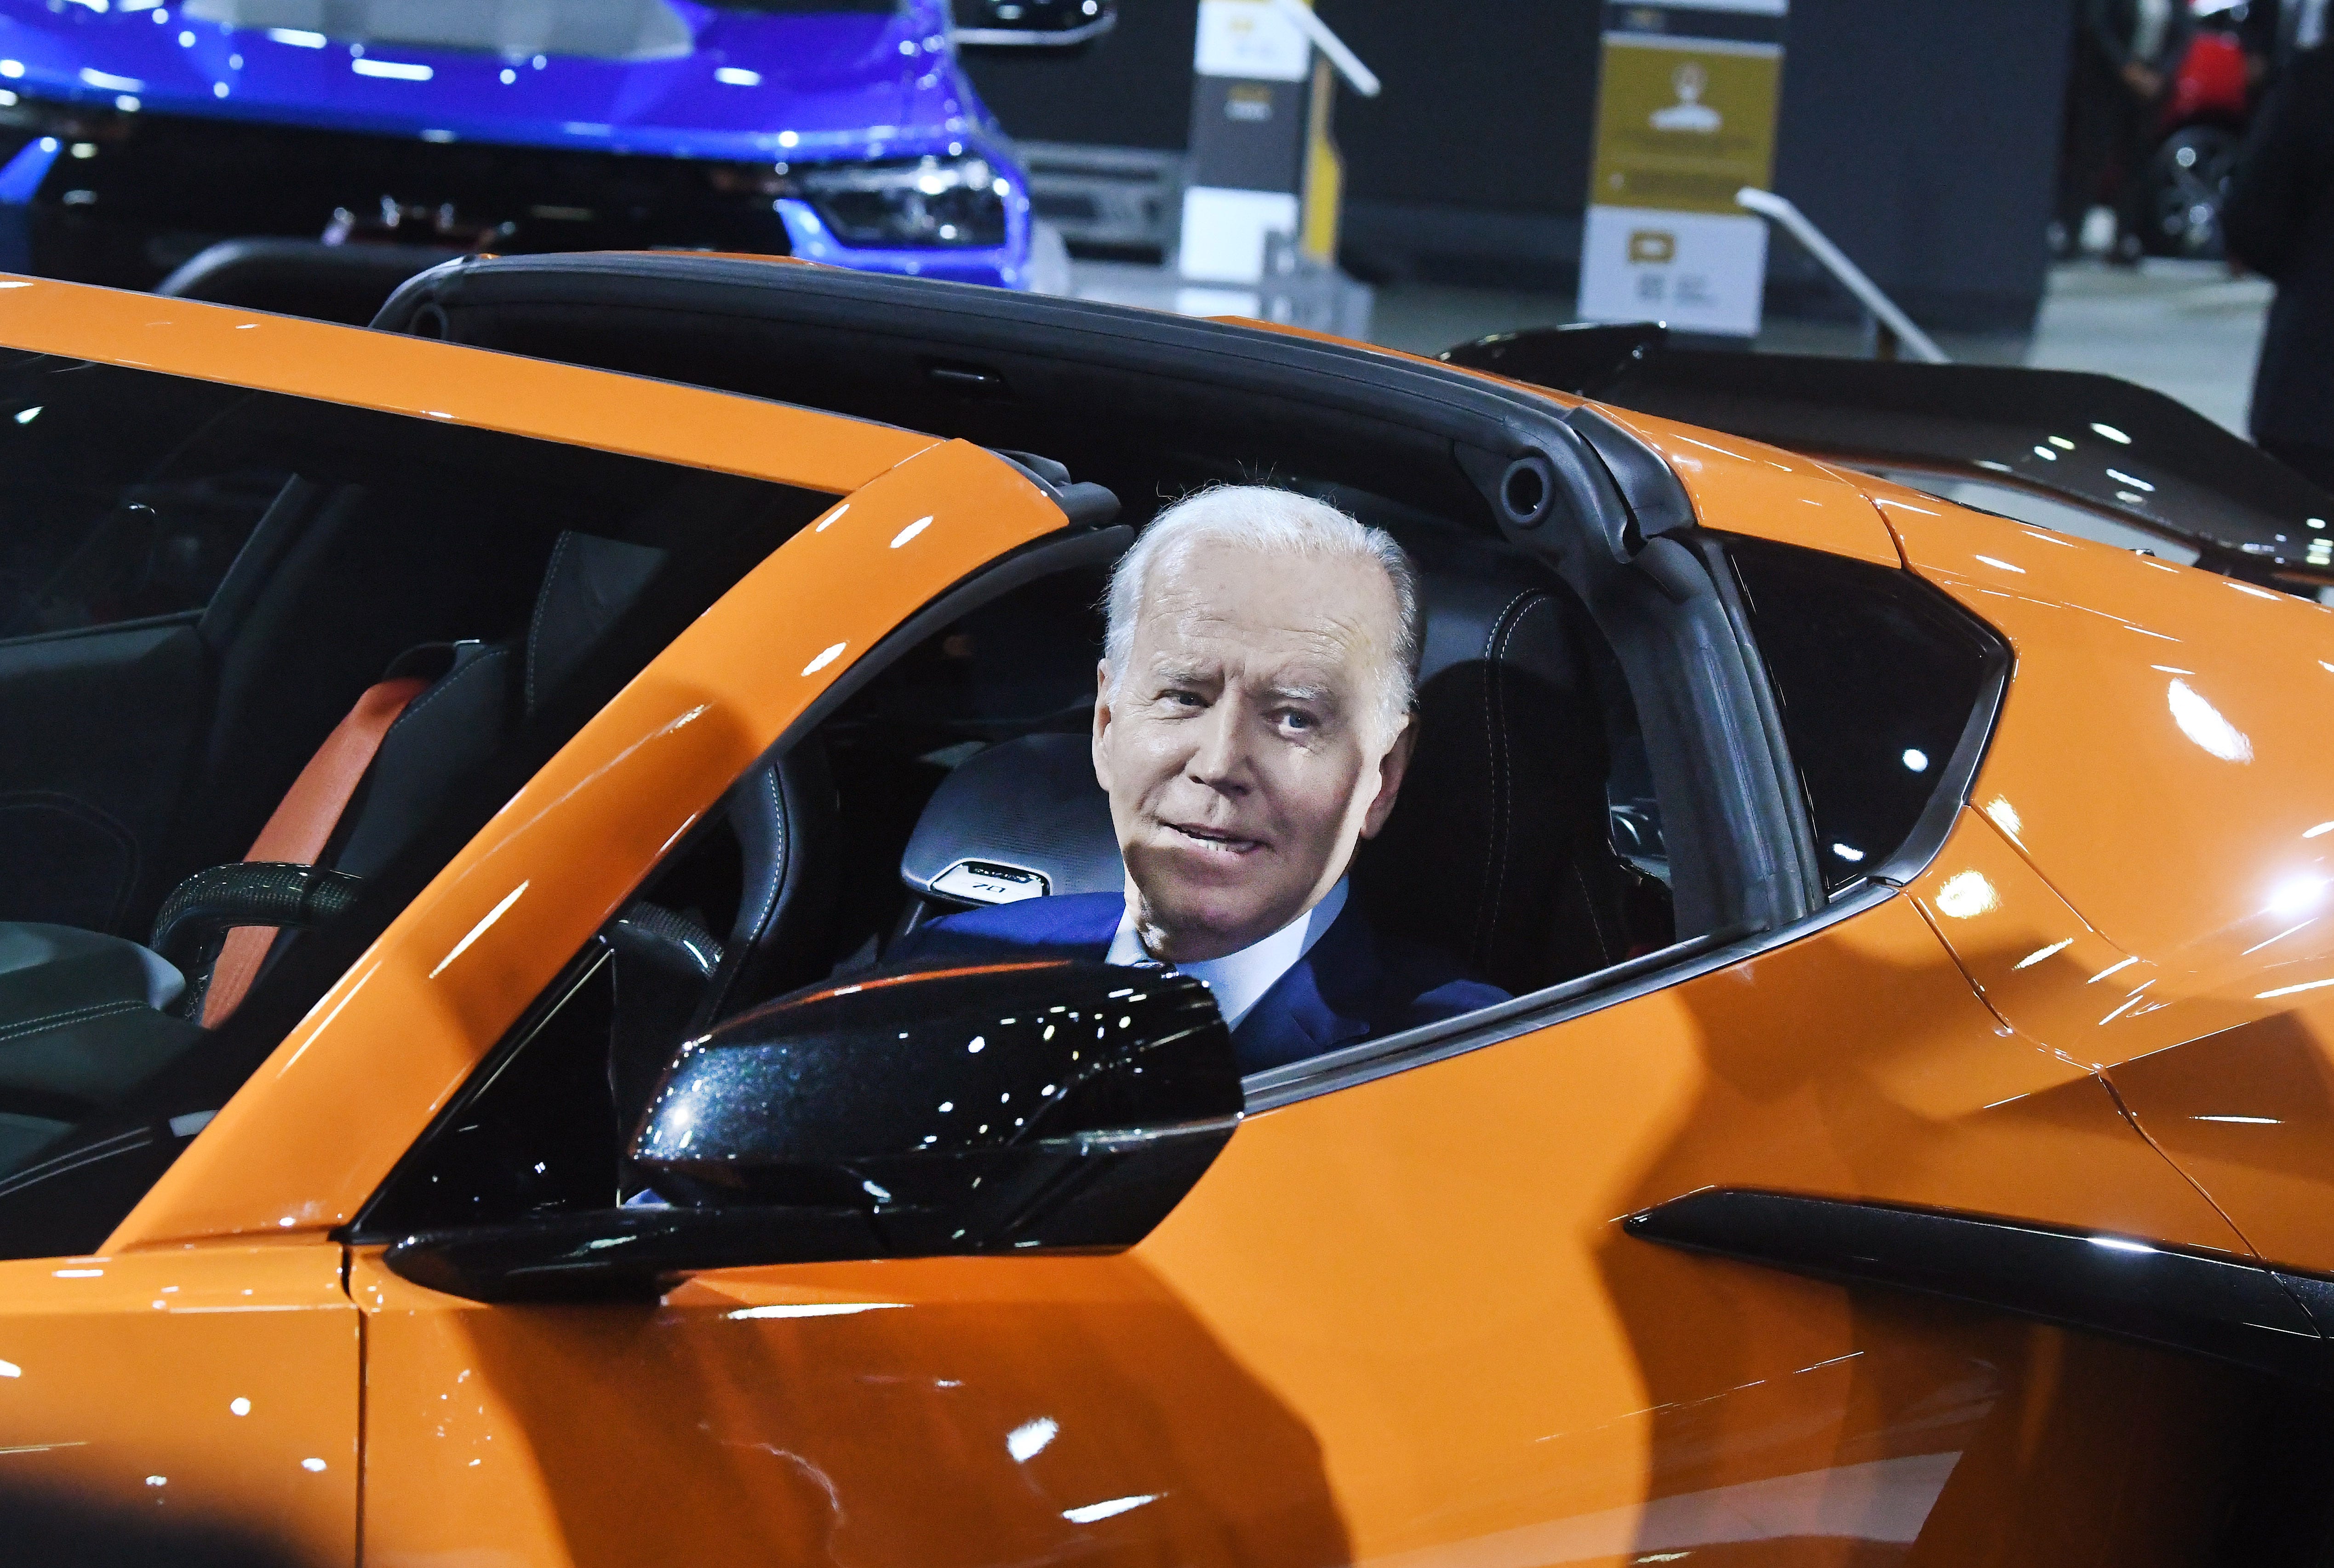 President Joe Biden looking pretty good in a Corvette Z06 convertible during a tour of the 2022 North American International Auto Show in Detroit, Michigan on September 14, 2022.